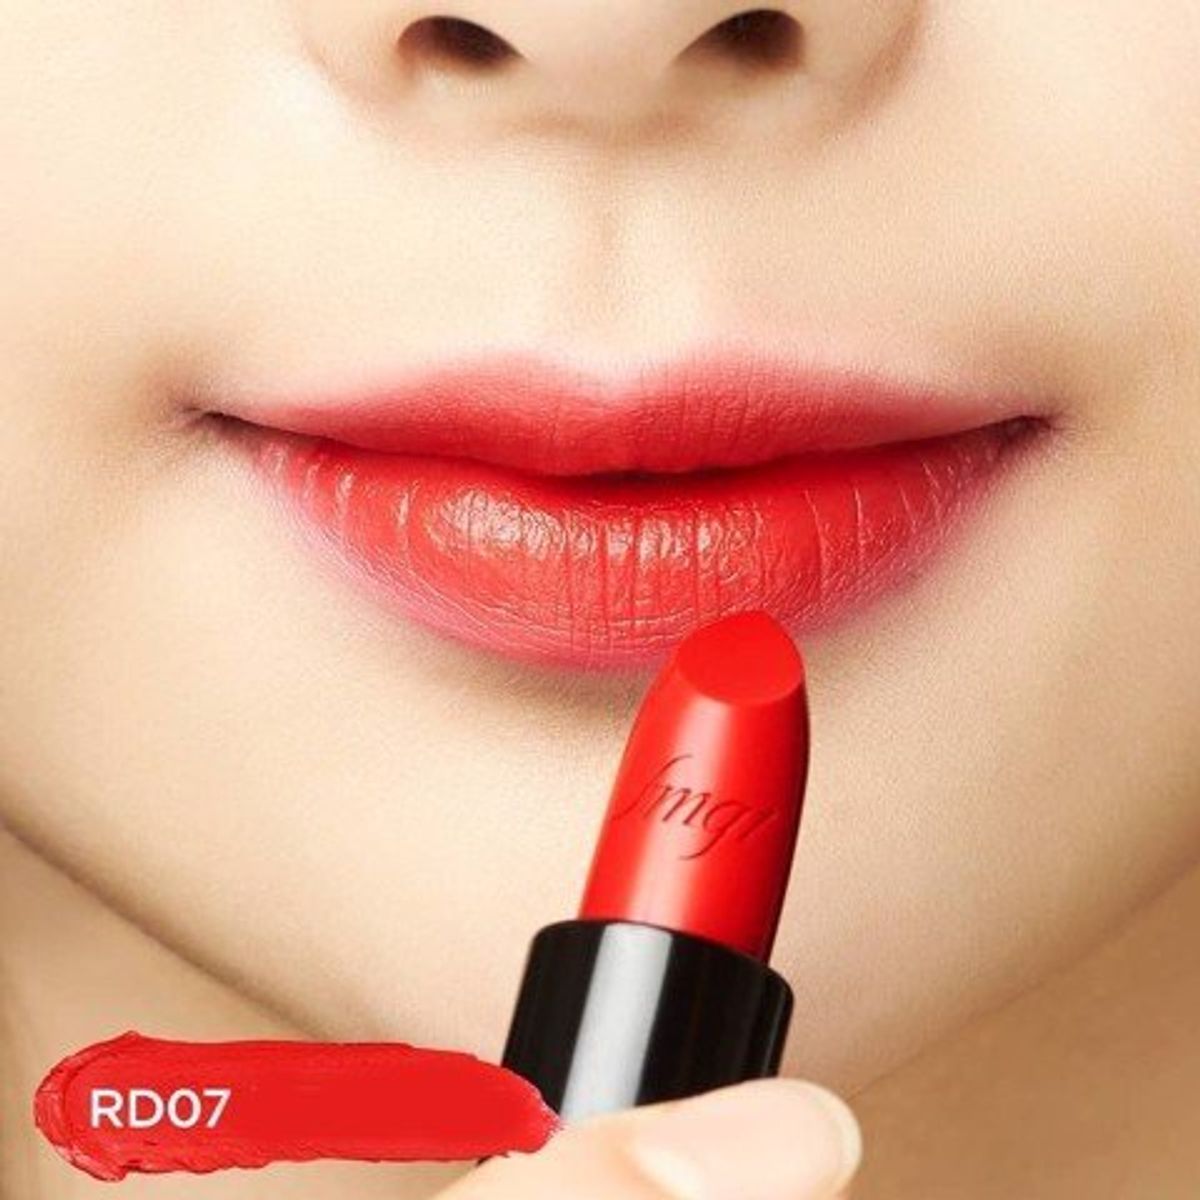 gift-fmgt-son-thoi-duong-am-rouge-satin-moisture-signature-3-6g-rd07-signature-red-1